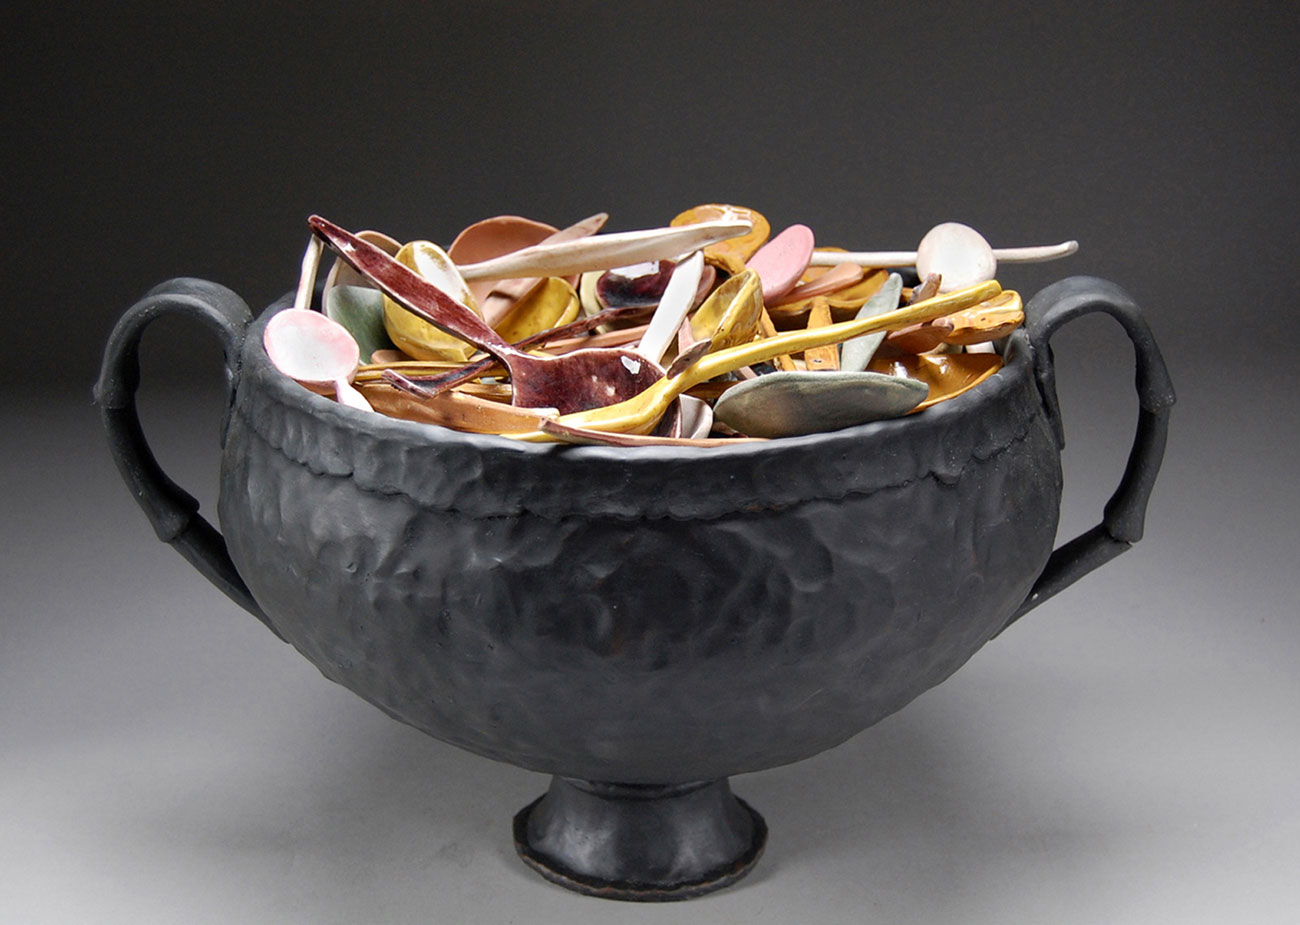 Stone Soup Spoon Theory, 2015. Hand-built earthenware with terra sigillata and glaze, 10 x 16 x 12 in.